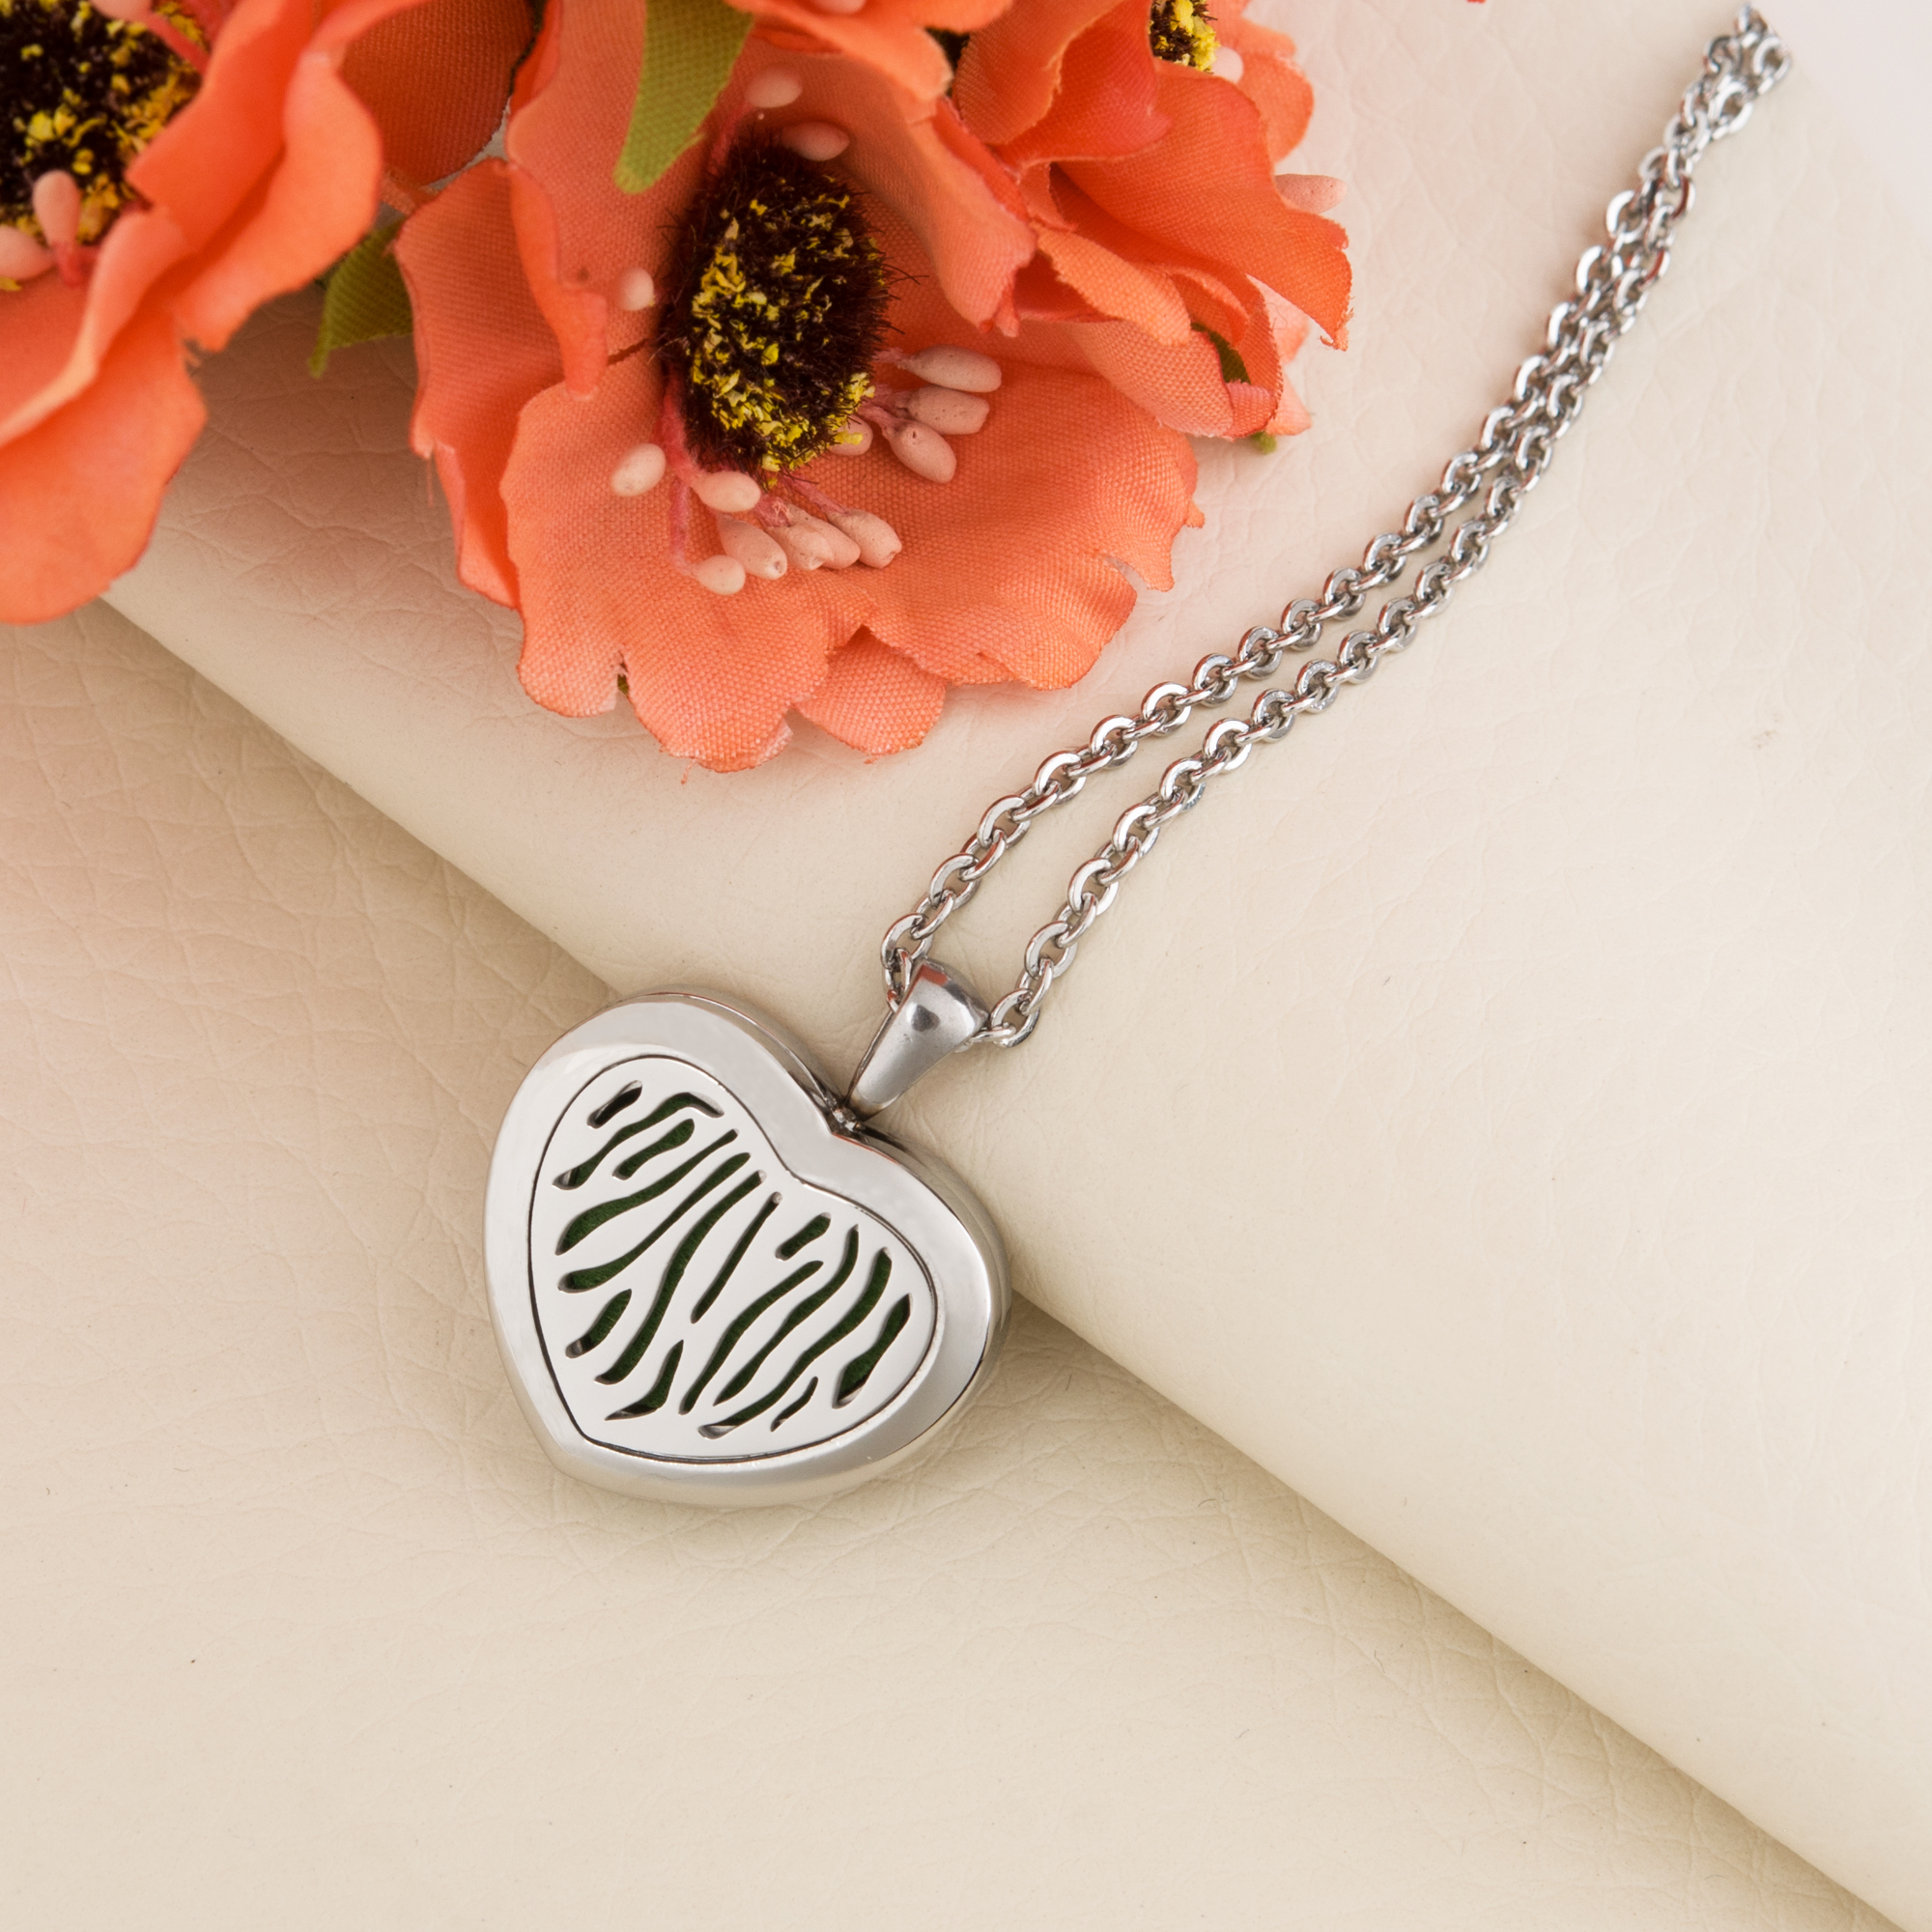 Anavia Birthday Gift for Mom, Essential Oil Diffuser Necklace, Aromatherapy Jewelry, Gift for Wife, Wife Birthday Gift, Gift for Girlfriend, Anniversary Gift, Friend Gift- Lavender Oil - image 2 of 8